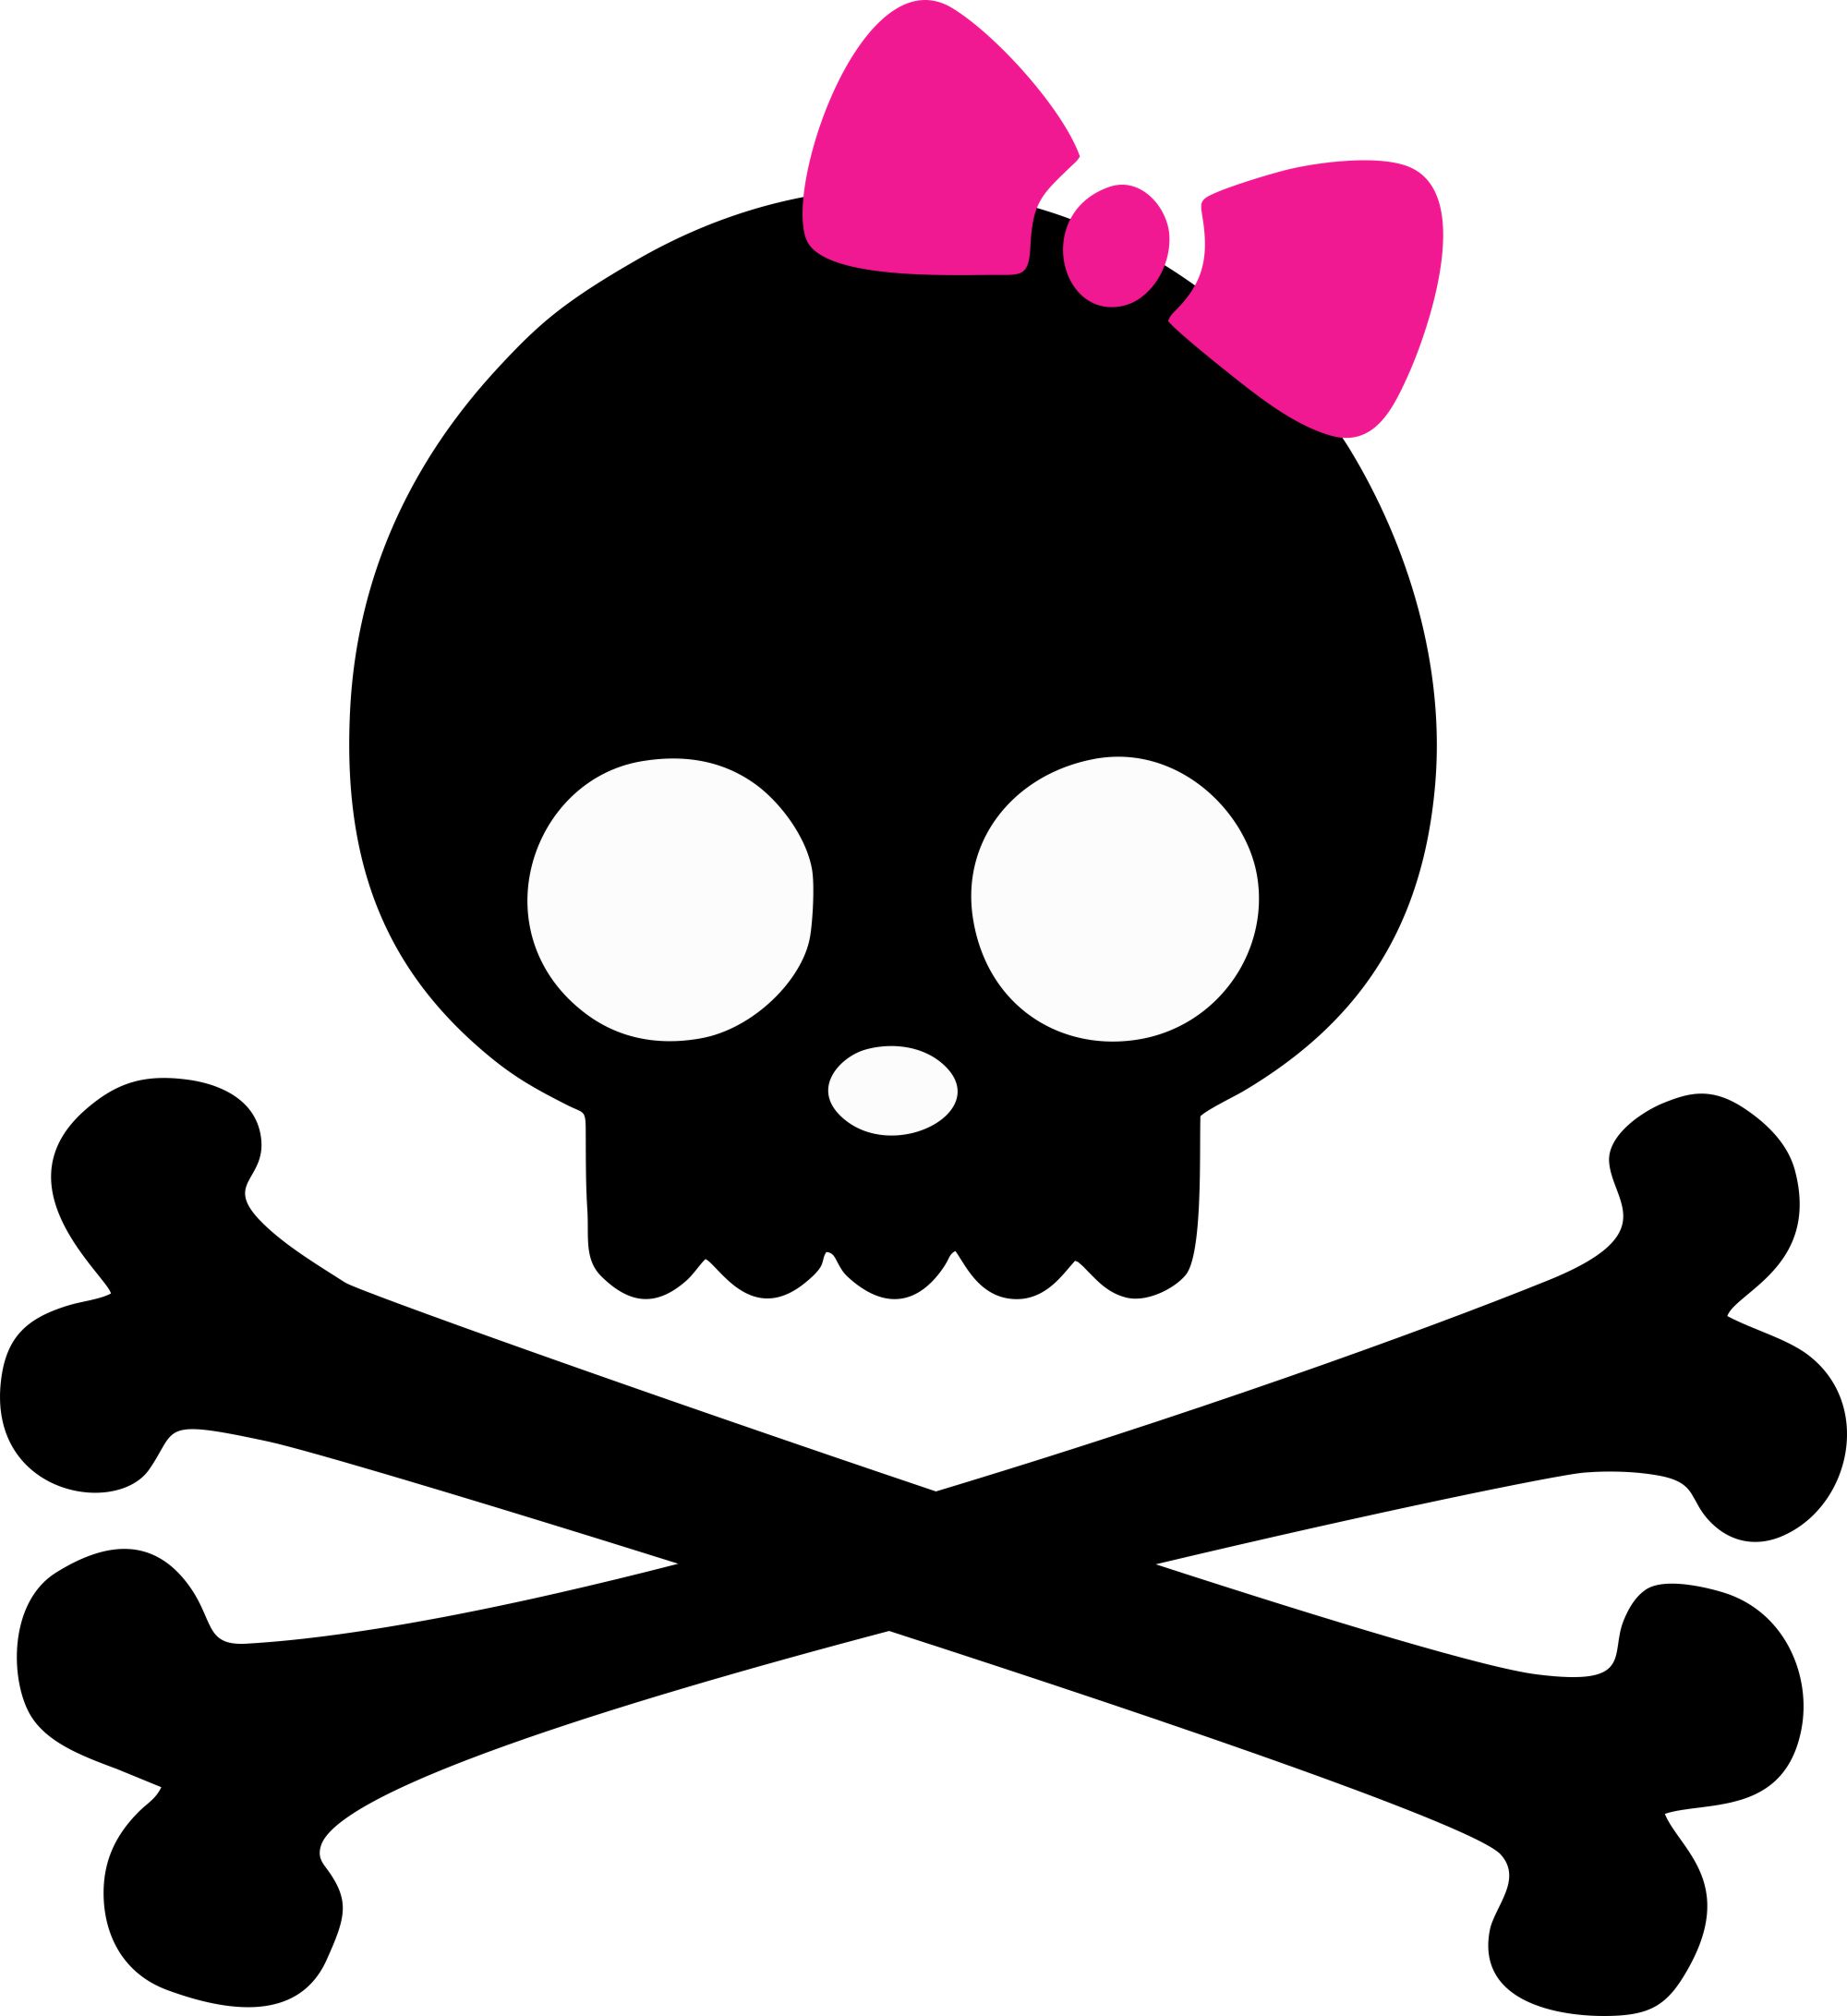 12 Skull And Crossbones Pink Free Cliparts That You Can Download To    